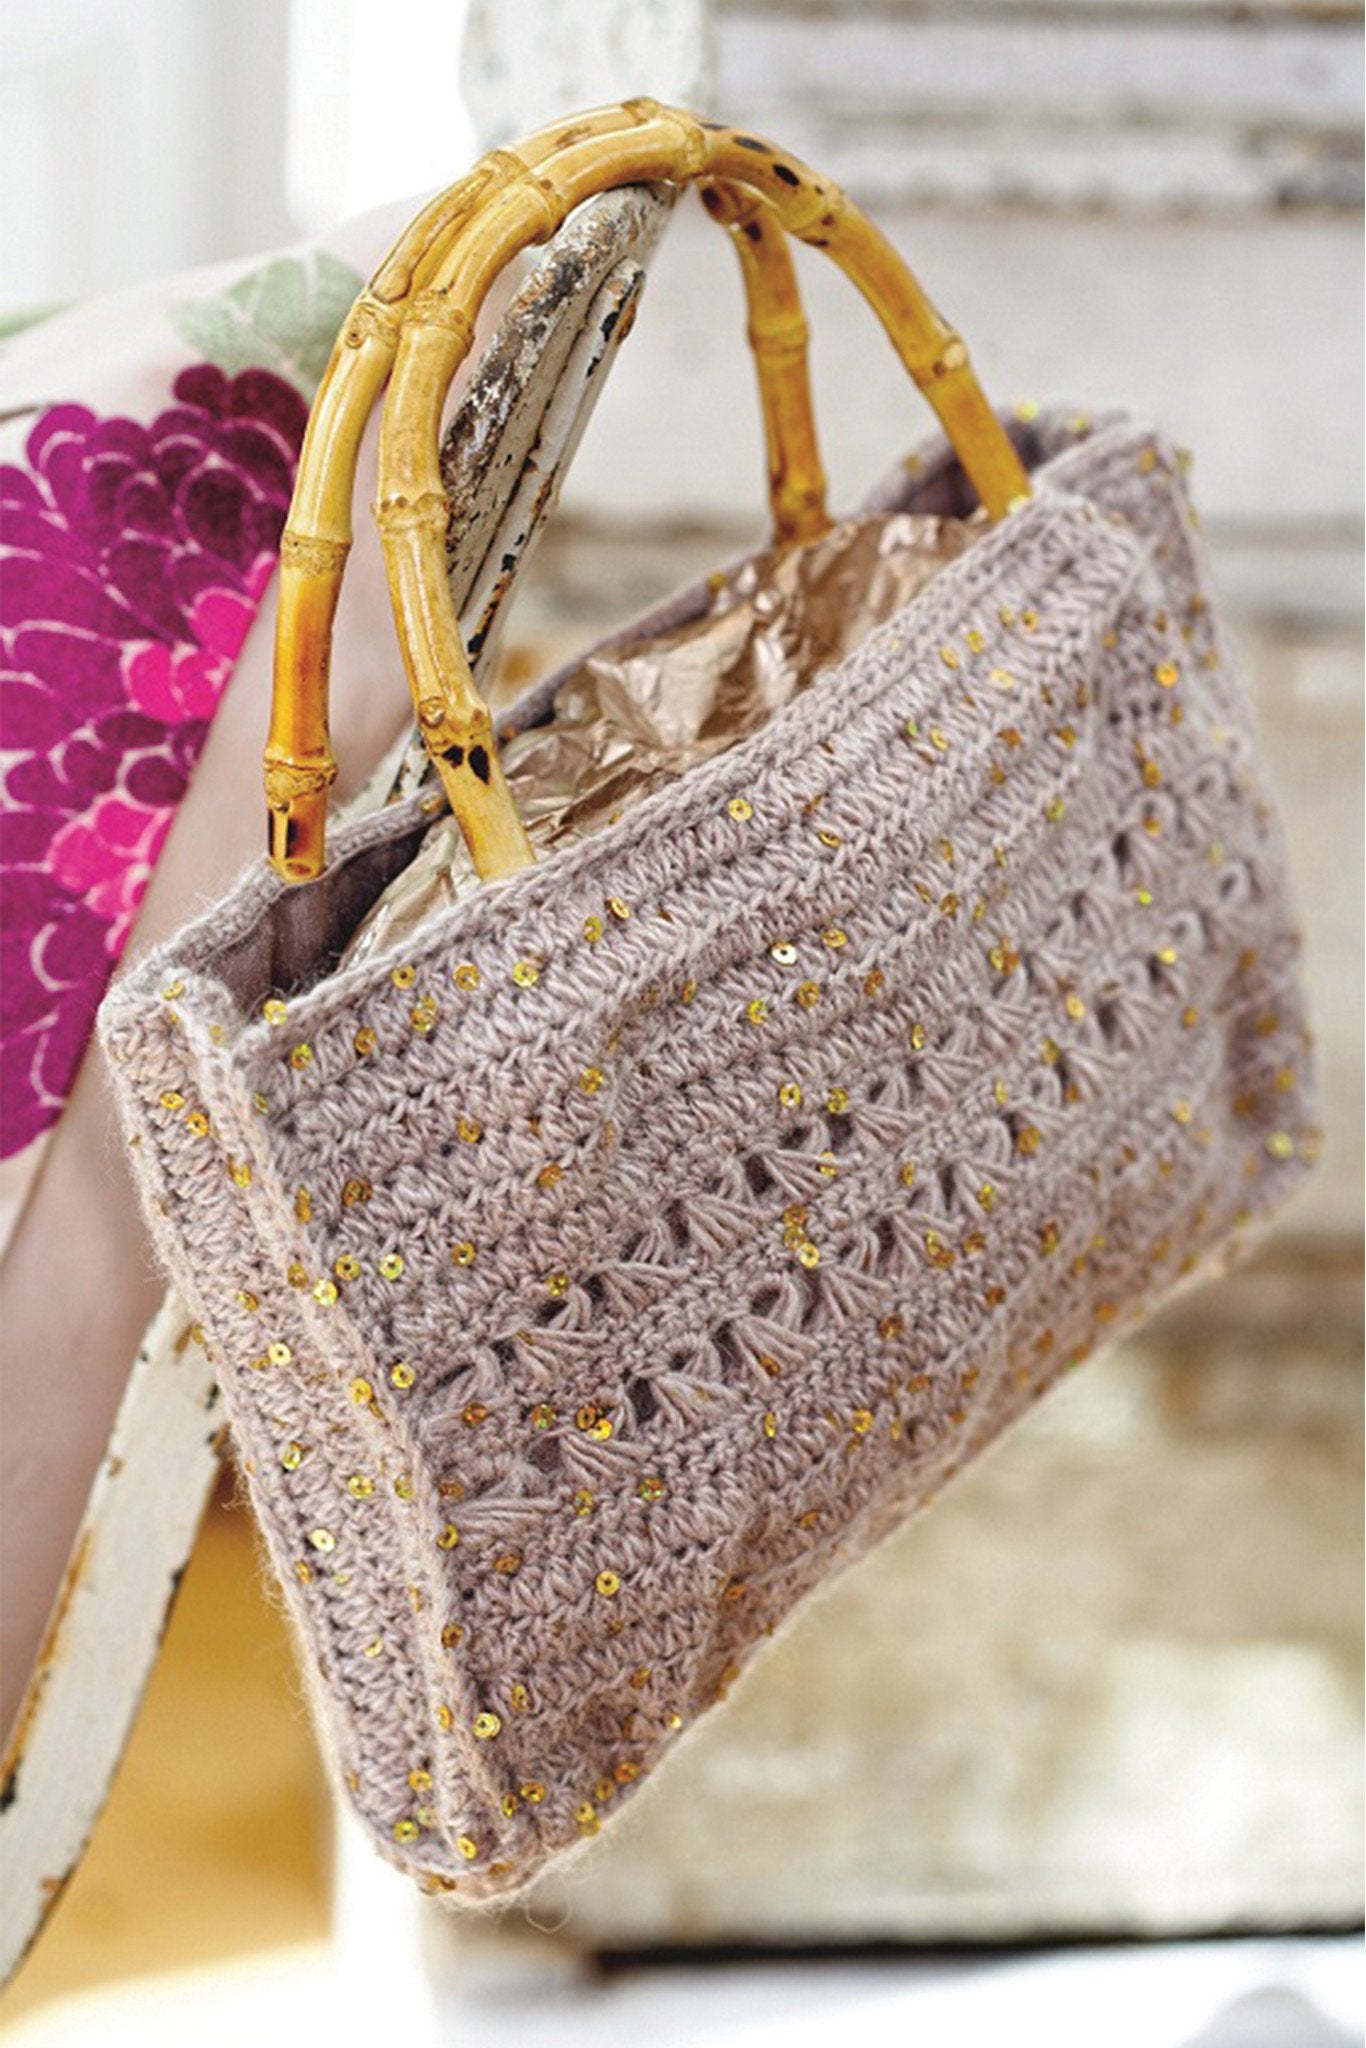 Glitter Bag With Sequins Crochet Pattern – The Knitting Network